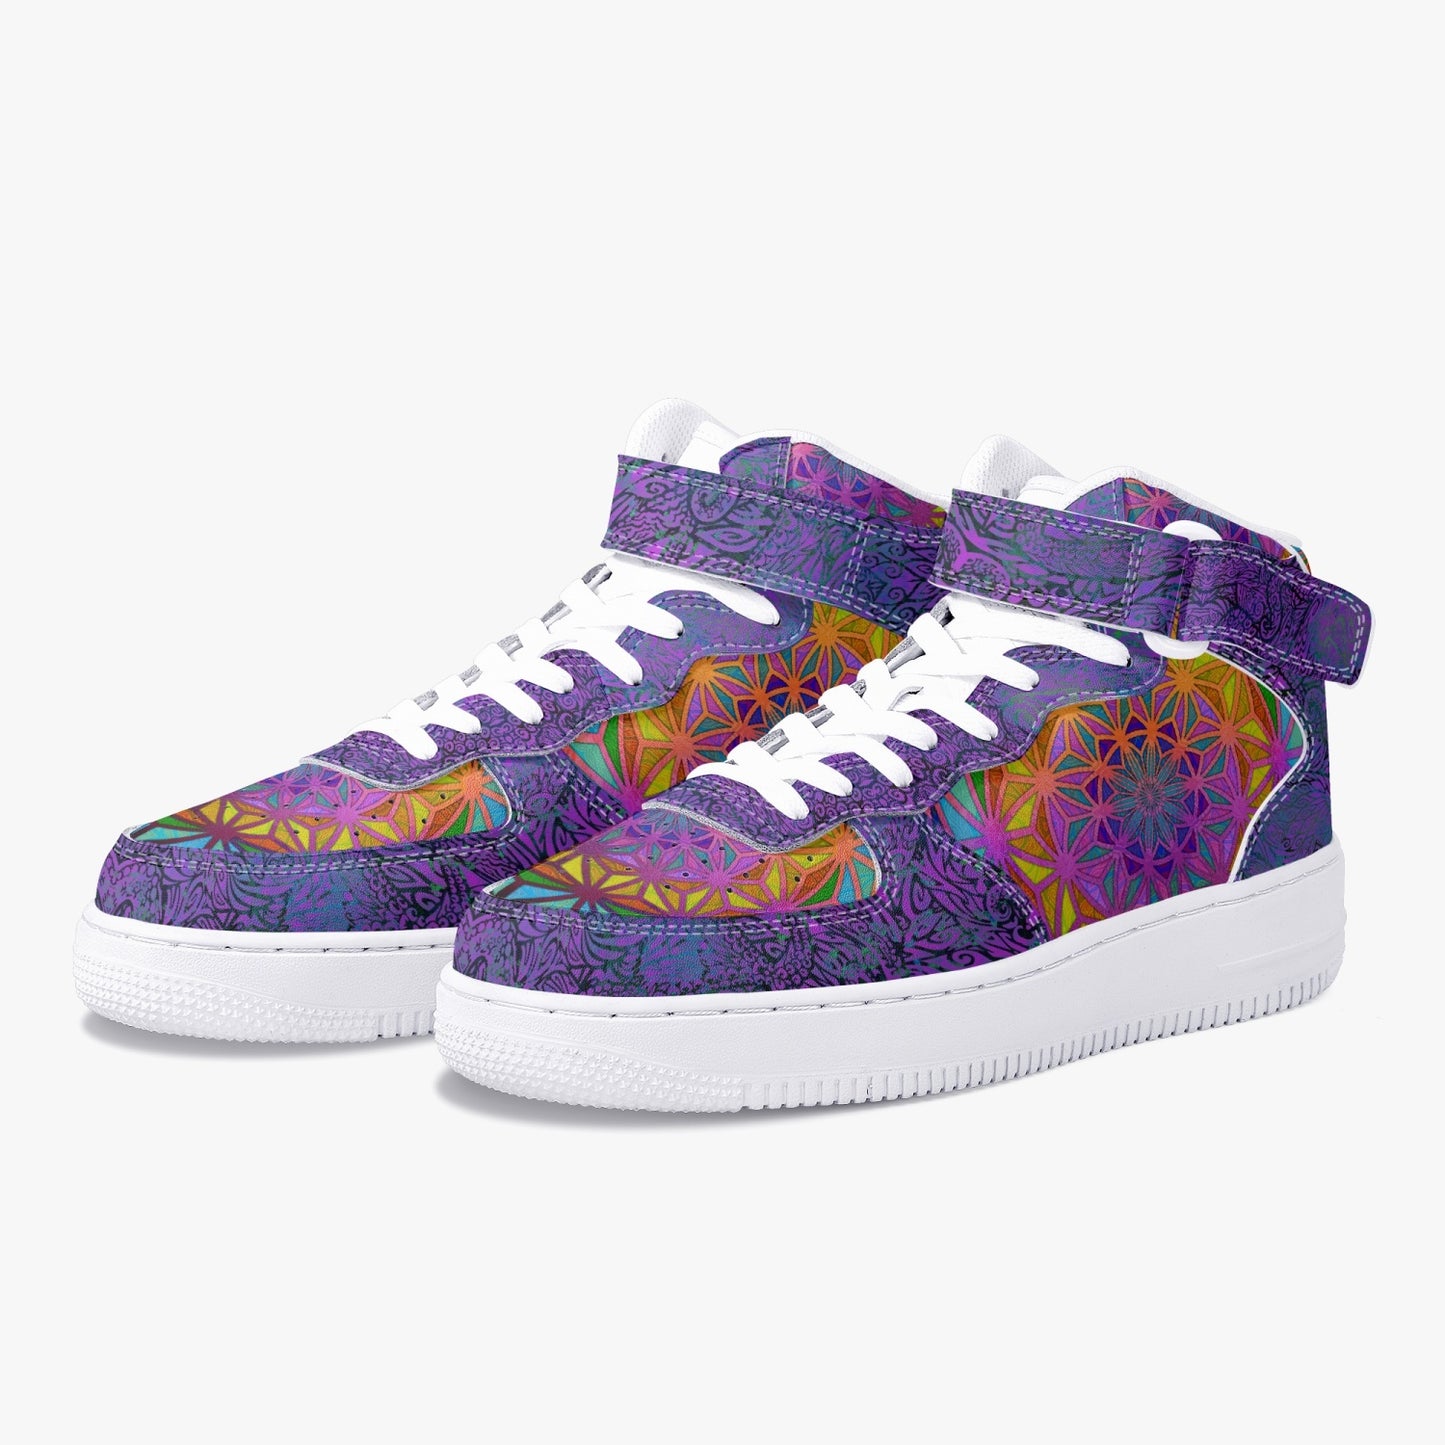 Birth of a Flower High-Top Sneakers